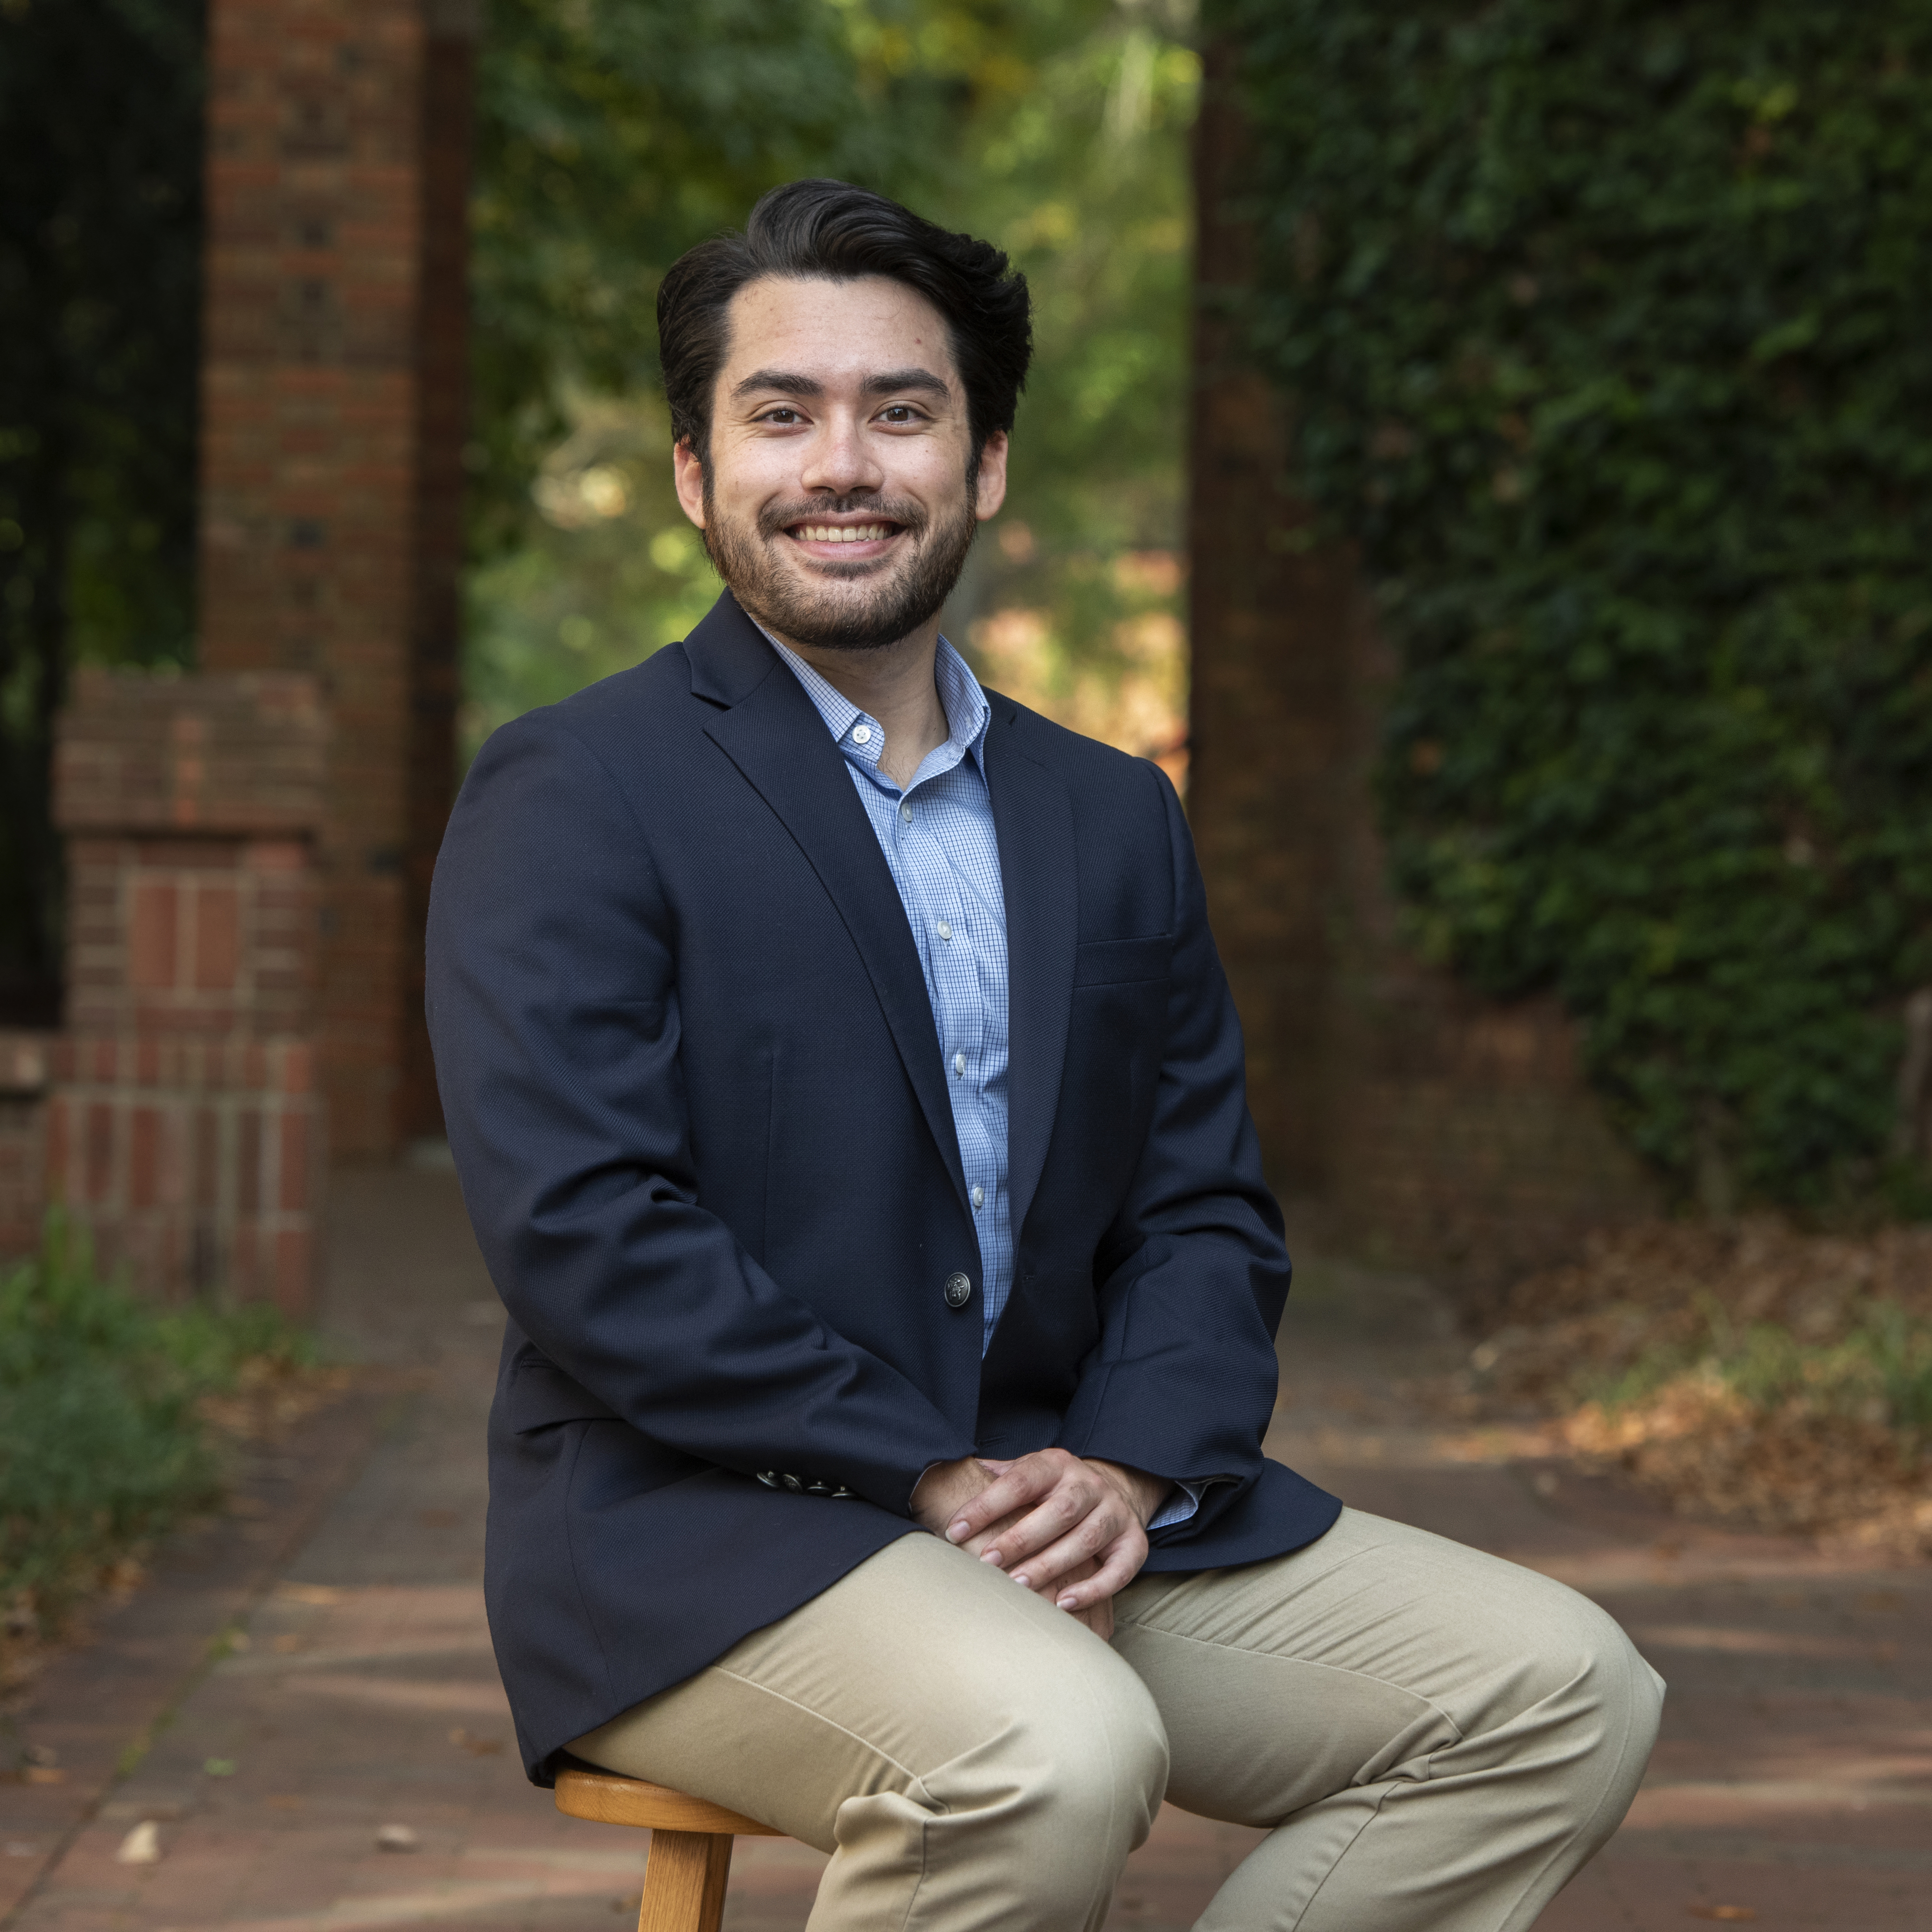 Lumen Scholar Kevin Scott poses for a portrait. By delving into an undergraduate research project, Kevin took advantage of one of the many experiential learning opportunities offered at Elon.